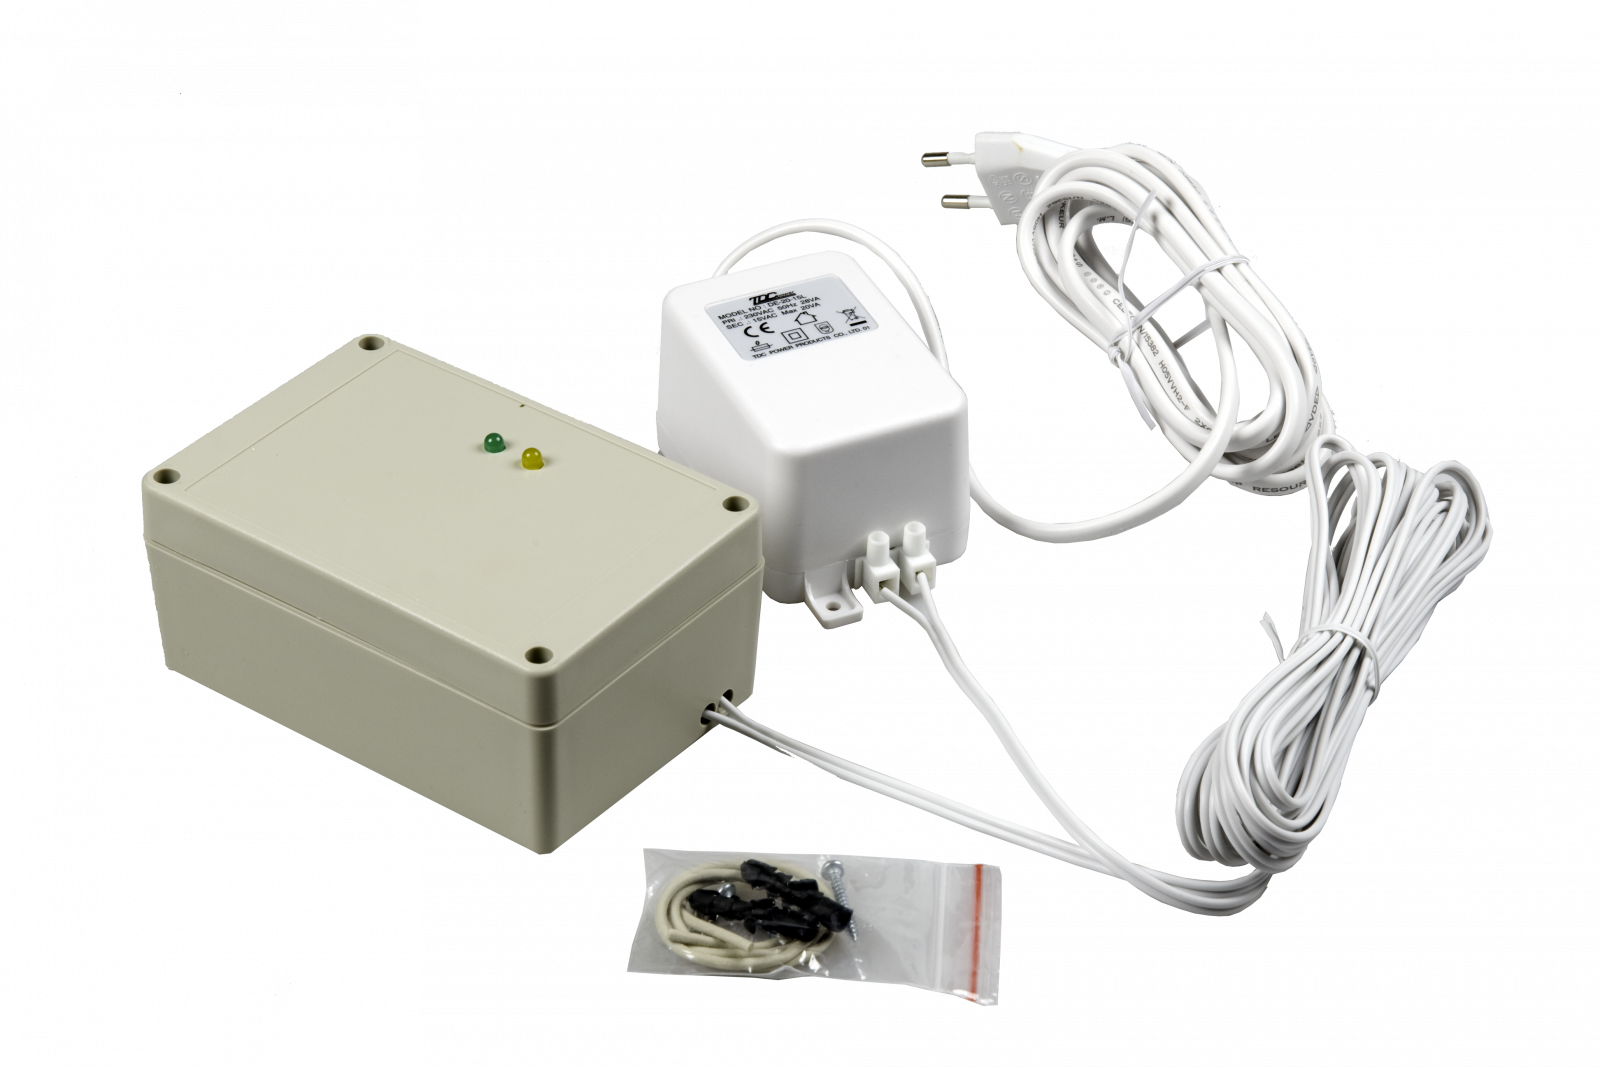 https://www.hw-group.com/files/styles/large/public/devices-photos/3354-back-up-power-supply-12v/backuppowersupplykopie.png